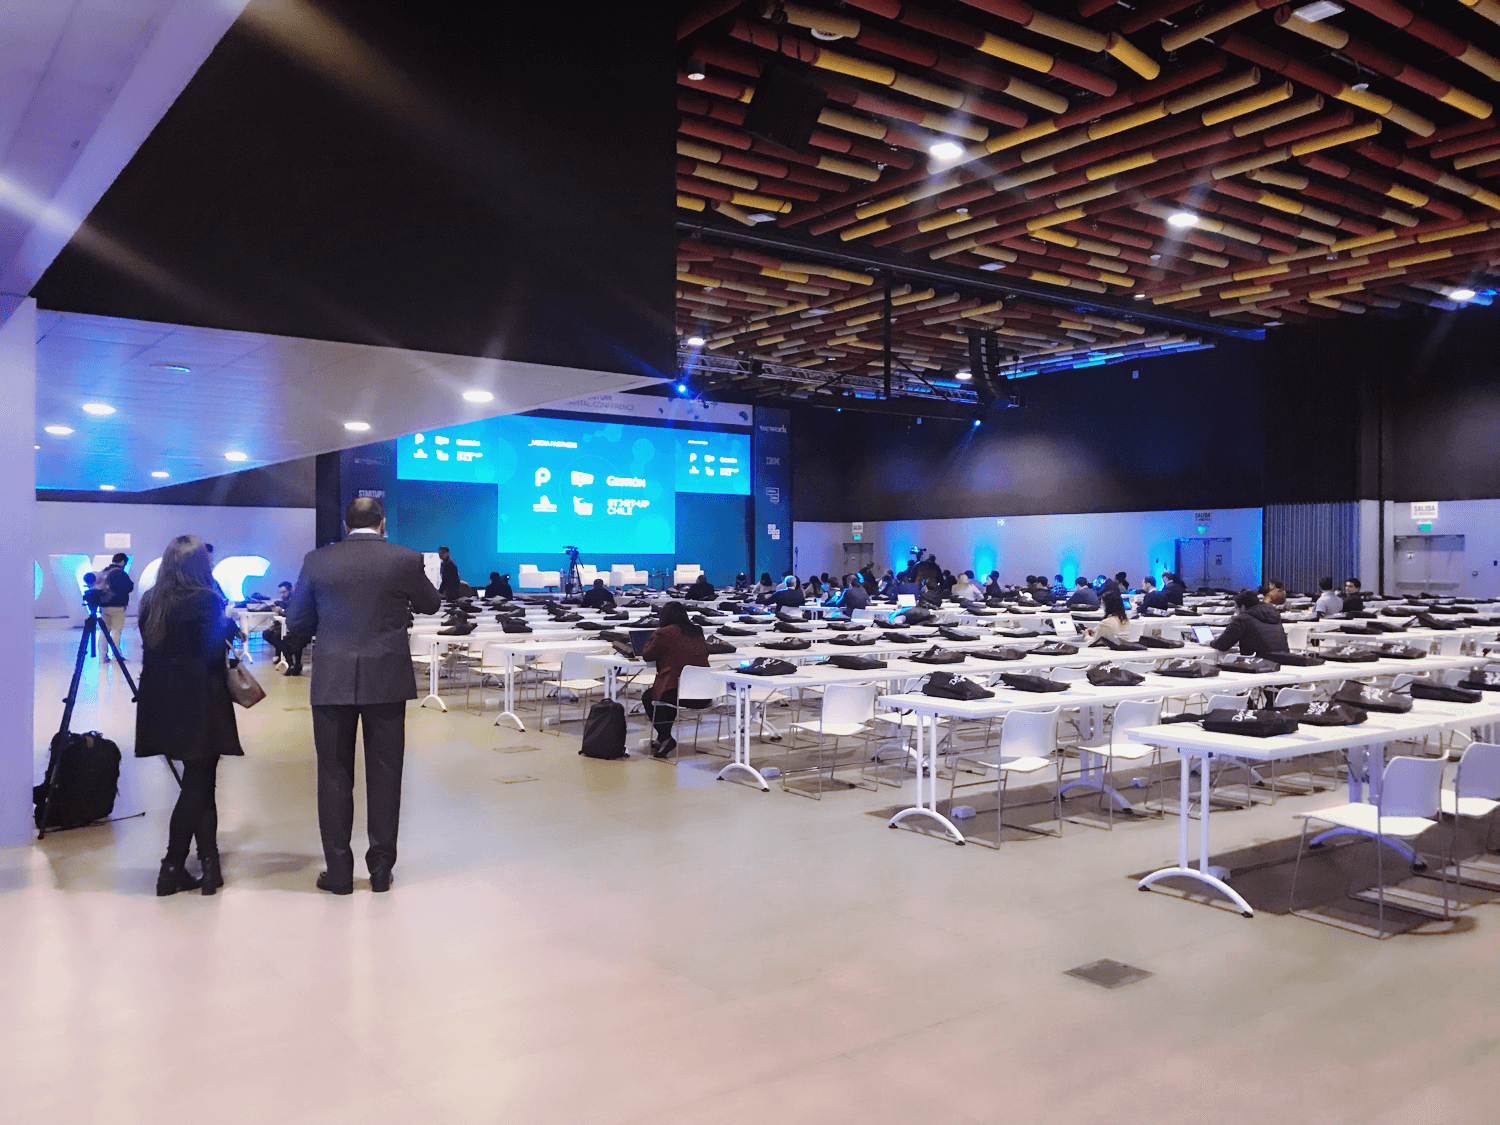 Live Blog: Latest action from Peru’s largest startup investor event